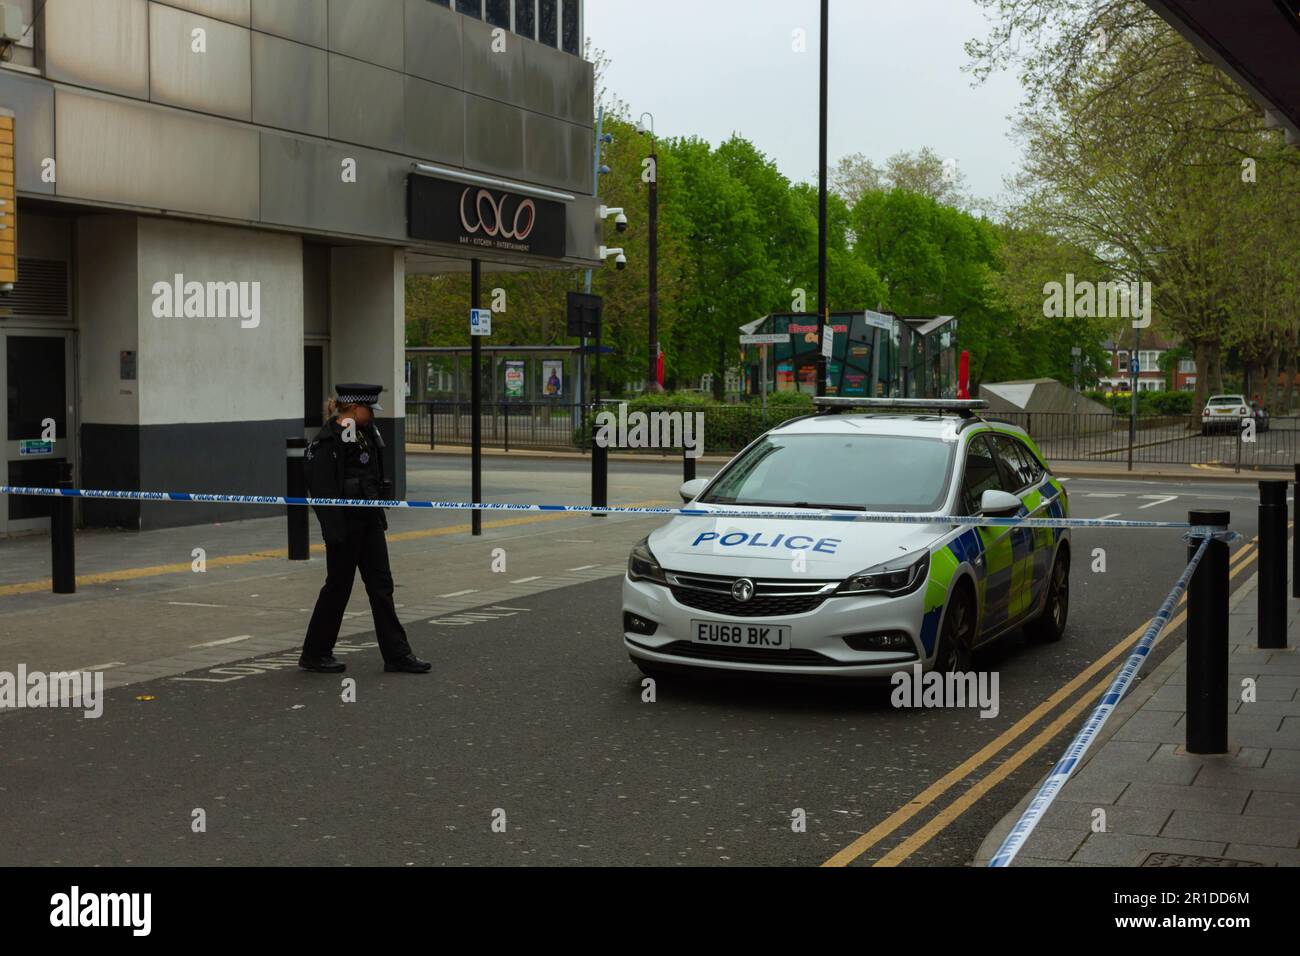 Southend-on-Sea, Essex, Britain. Essex Police continue an ongoing investigation in the city centre at Warrior Square, Southend, Essex after an incident and an area remains taped off this morning with Police Officers continuing to maintain a presence at the scene. In the past several residents have made complaints about several violent incidents and fights in this area. Helen Cowles / Alamy Live News Stock Photo